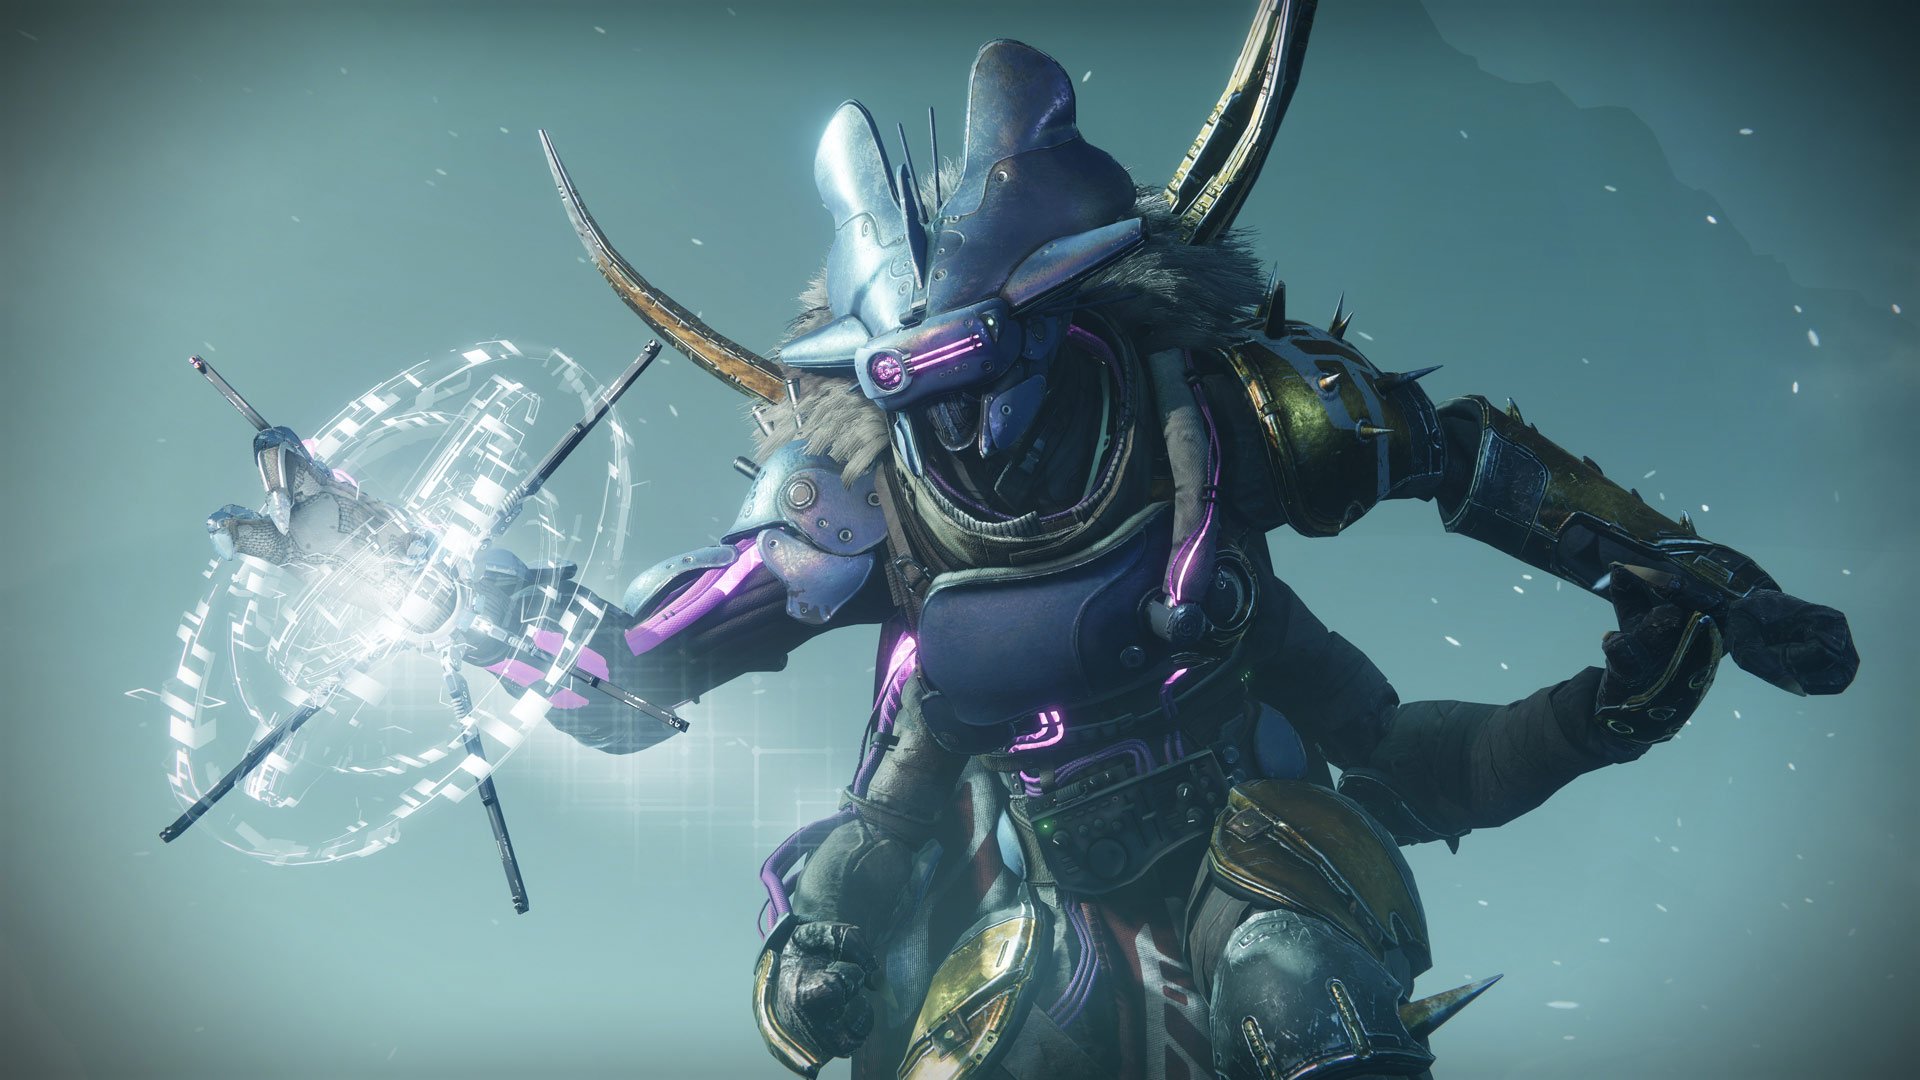 Destiny 2' players just slid into Xbox boss Phil Spencer's